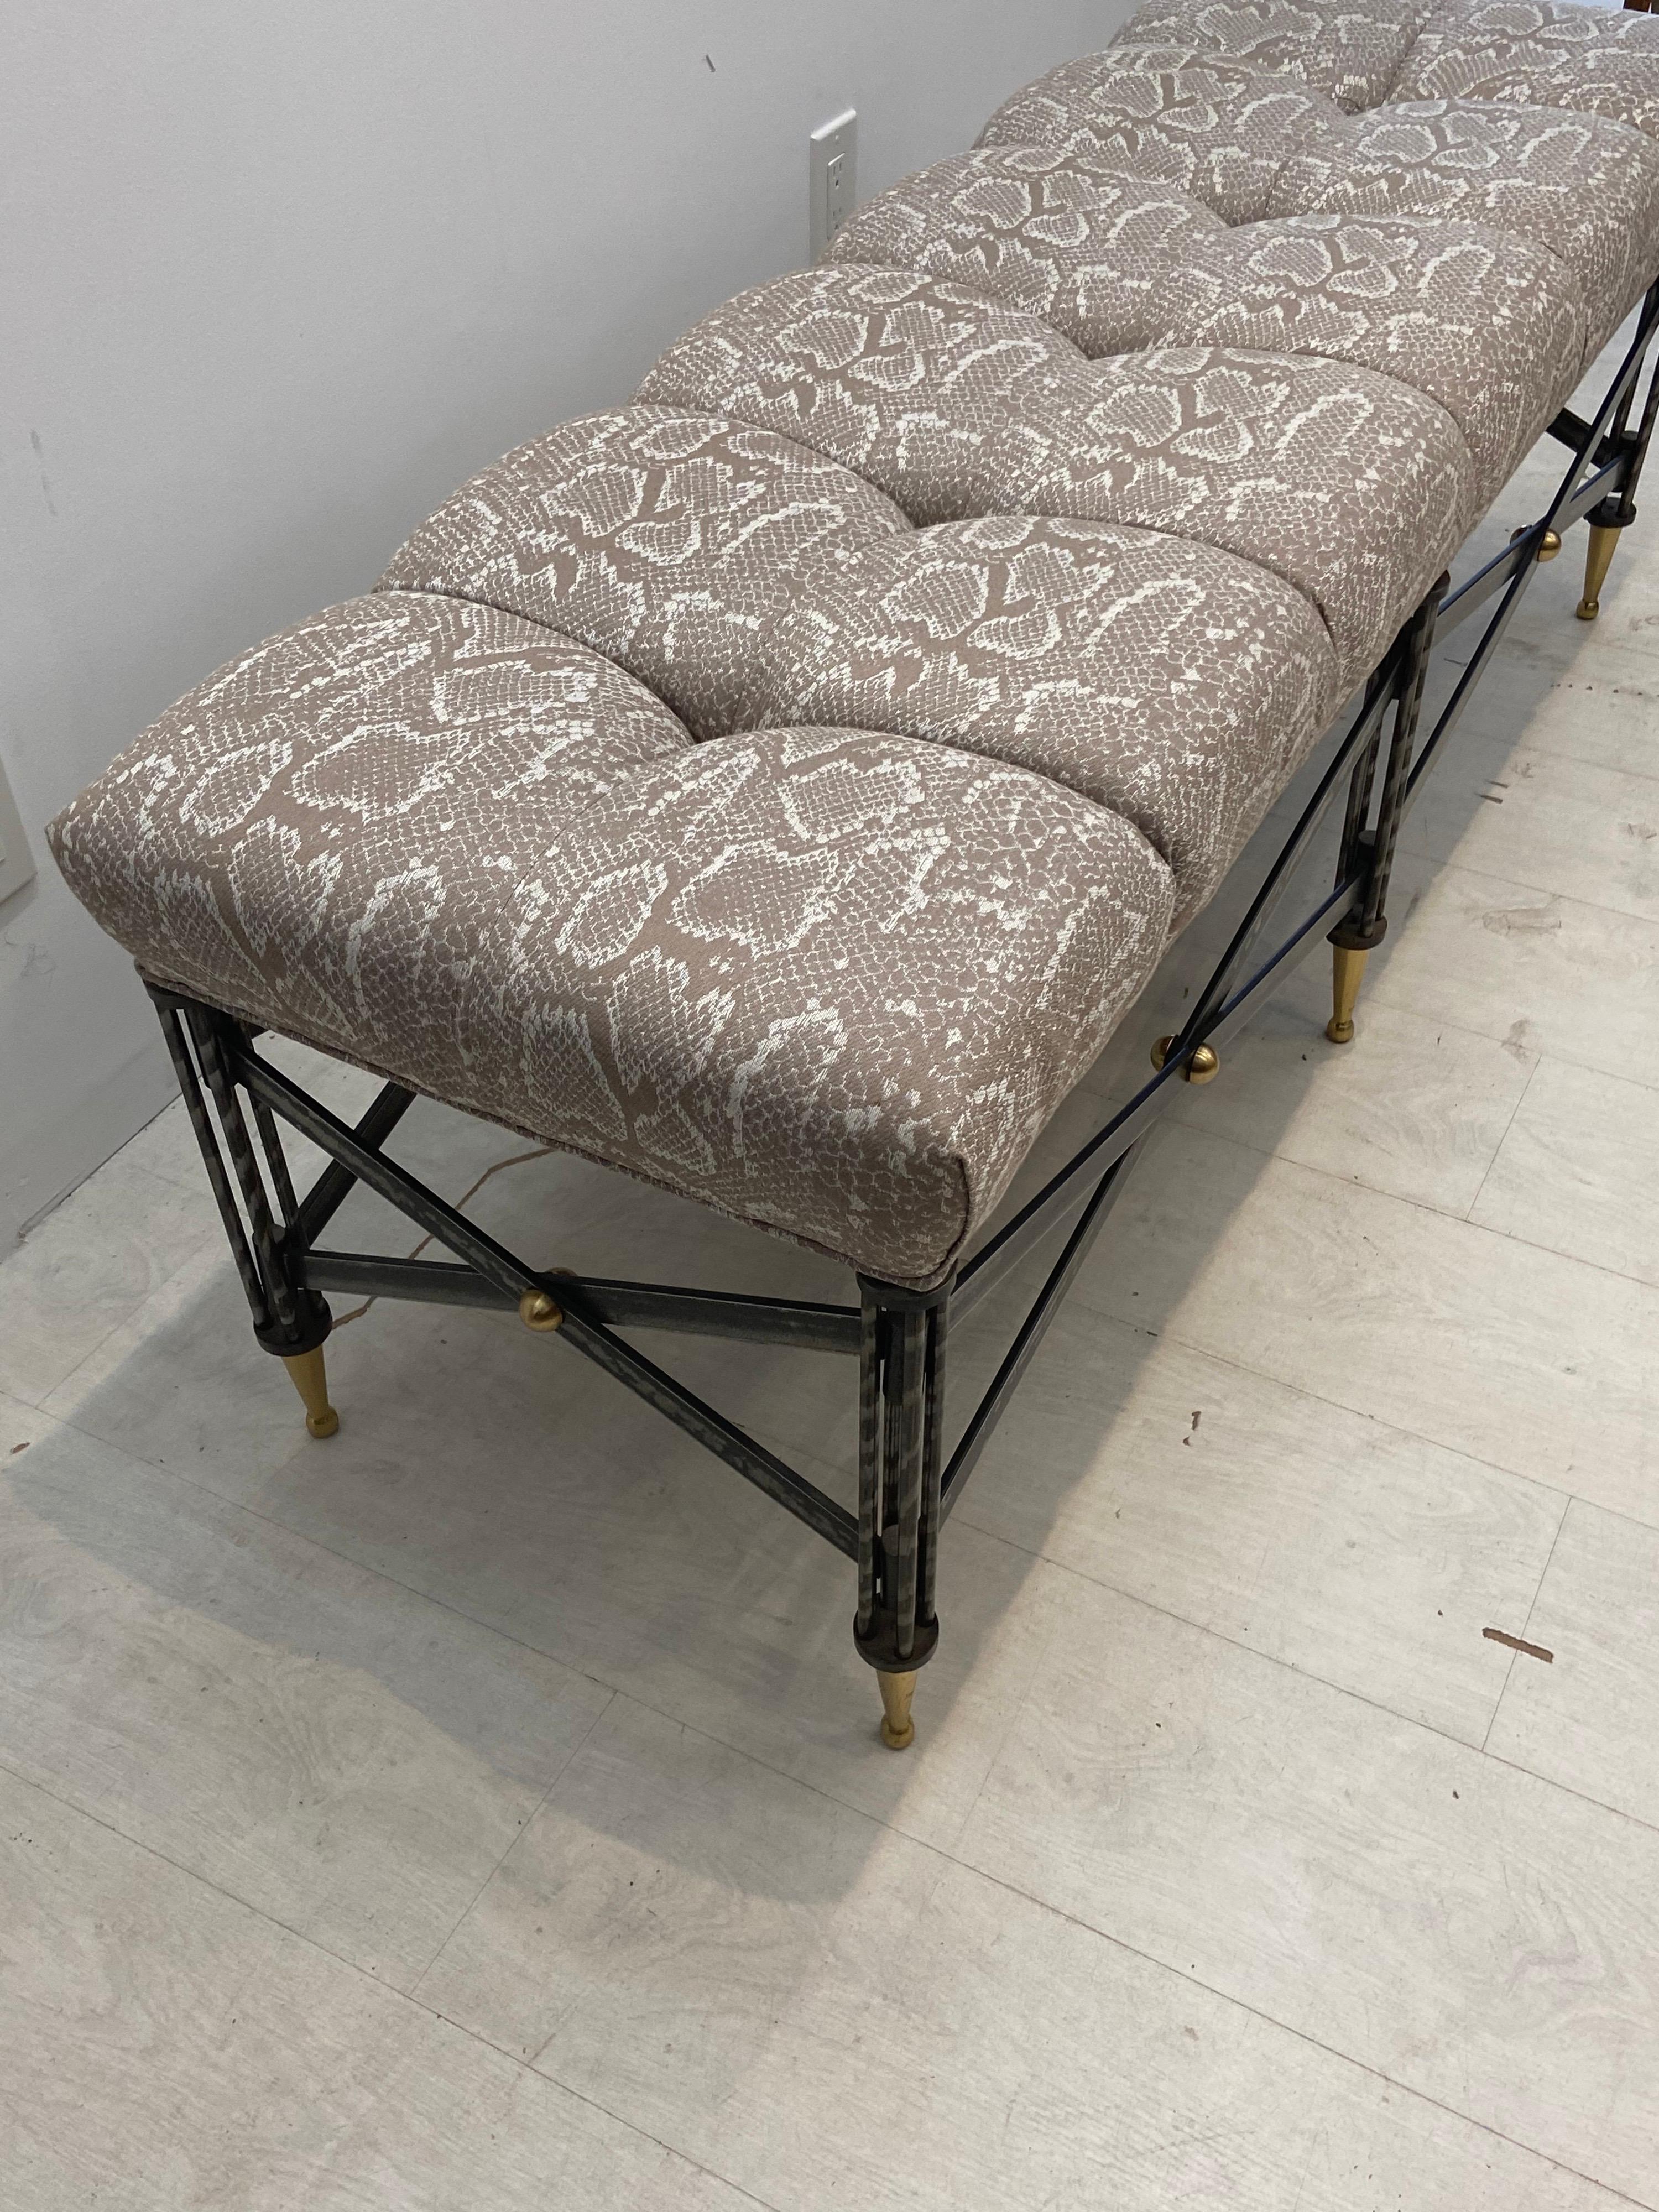 Neoclassical iron bench with brass feet. Upholstered top fabric in very good condition. 56 wide 19 deep 20 inches high.